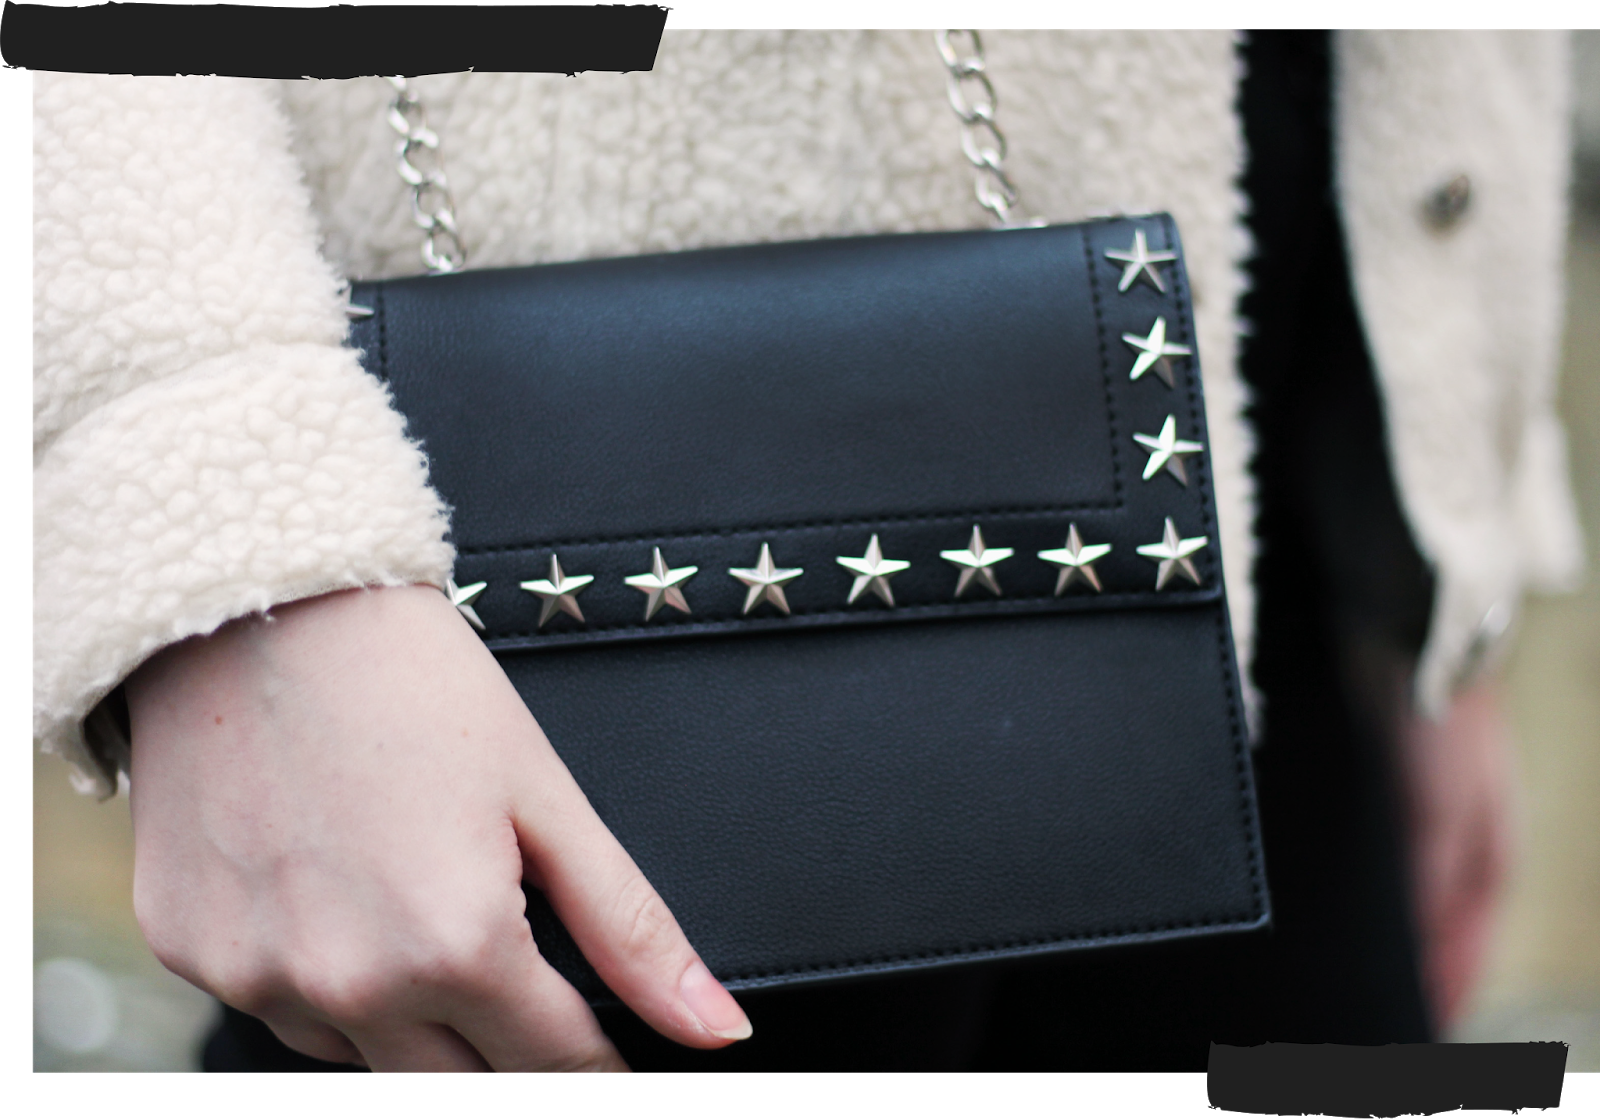 ASOS Missguided black cross body bag with silver star stud detail